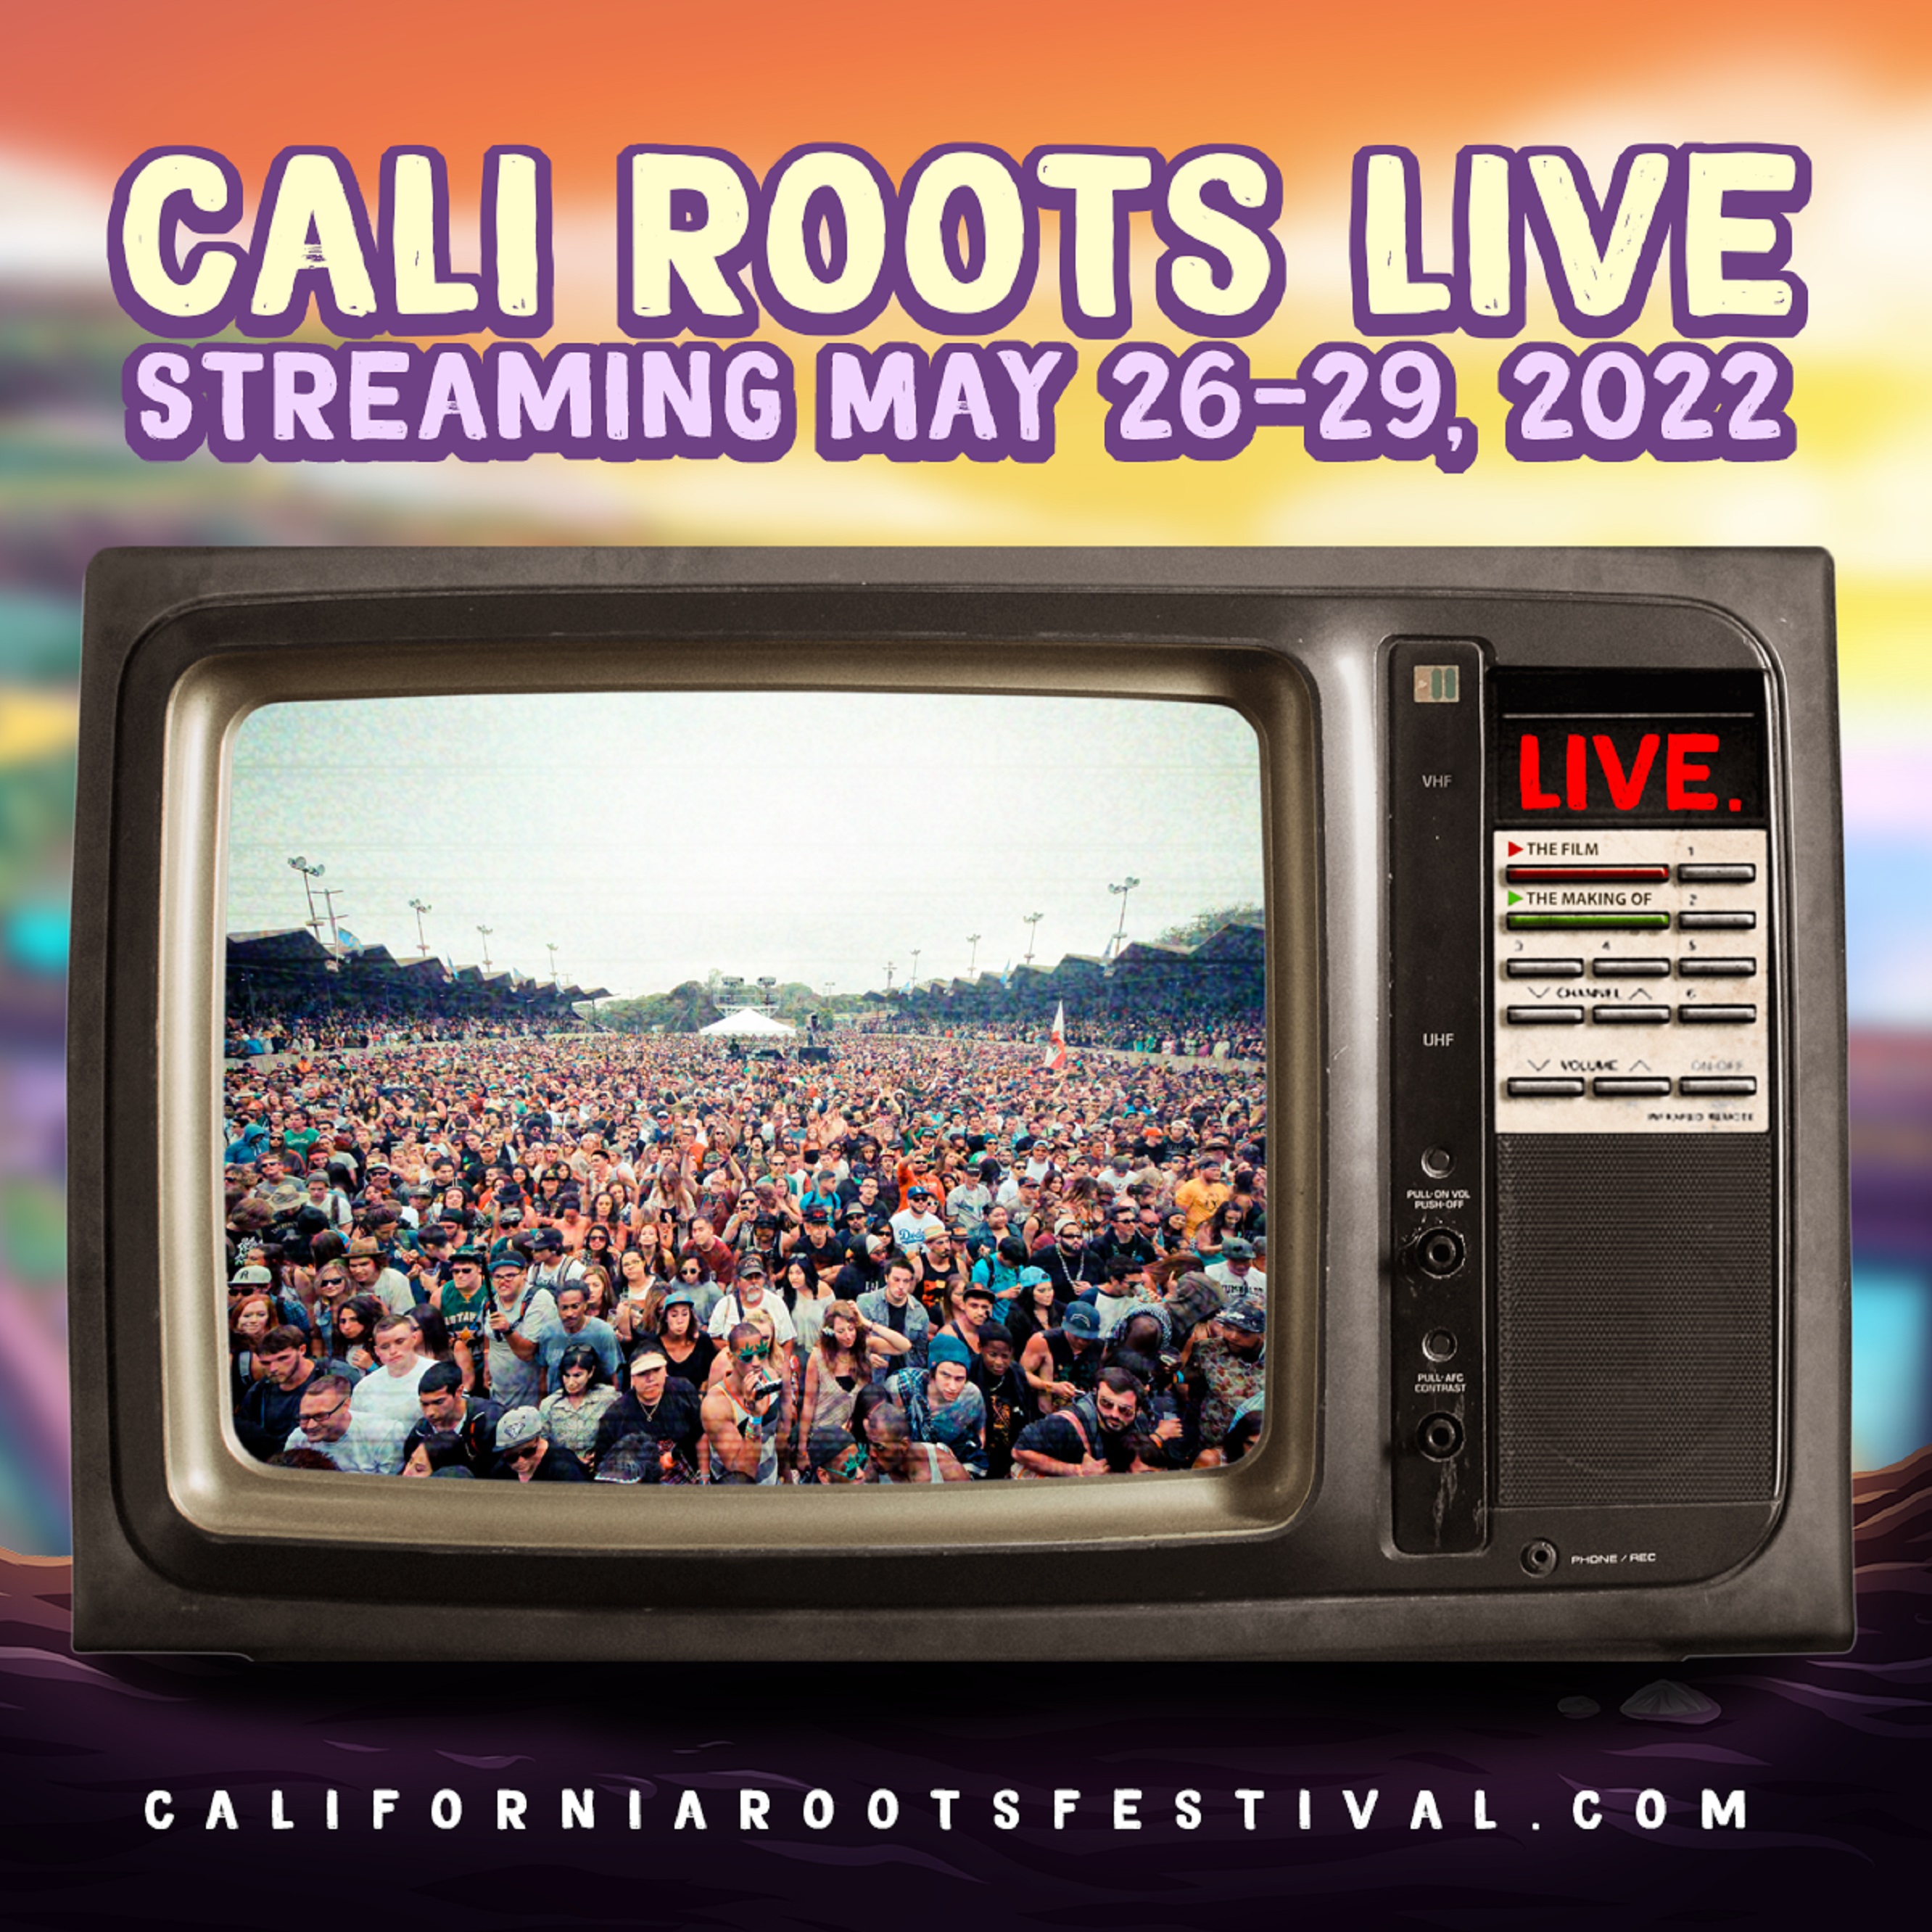 California Roots Music & Arts Festival to Broadcast LiveFor Cali Roots Live - The Return!